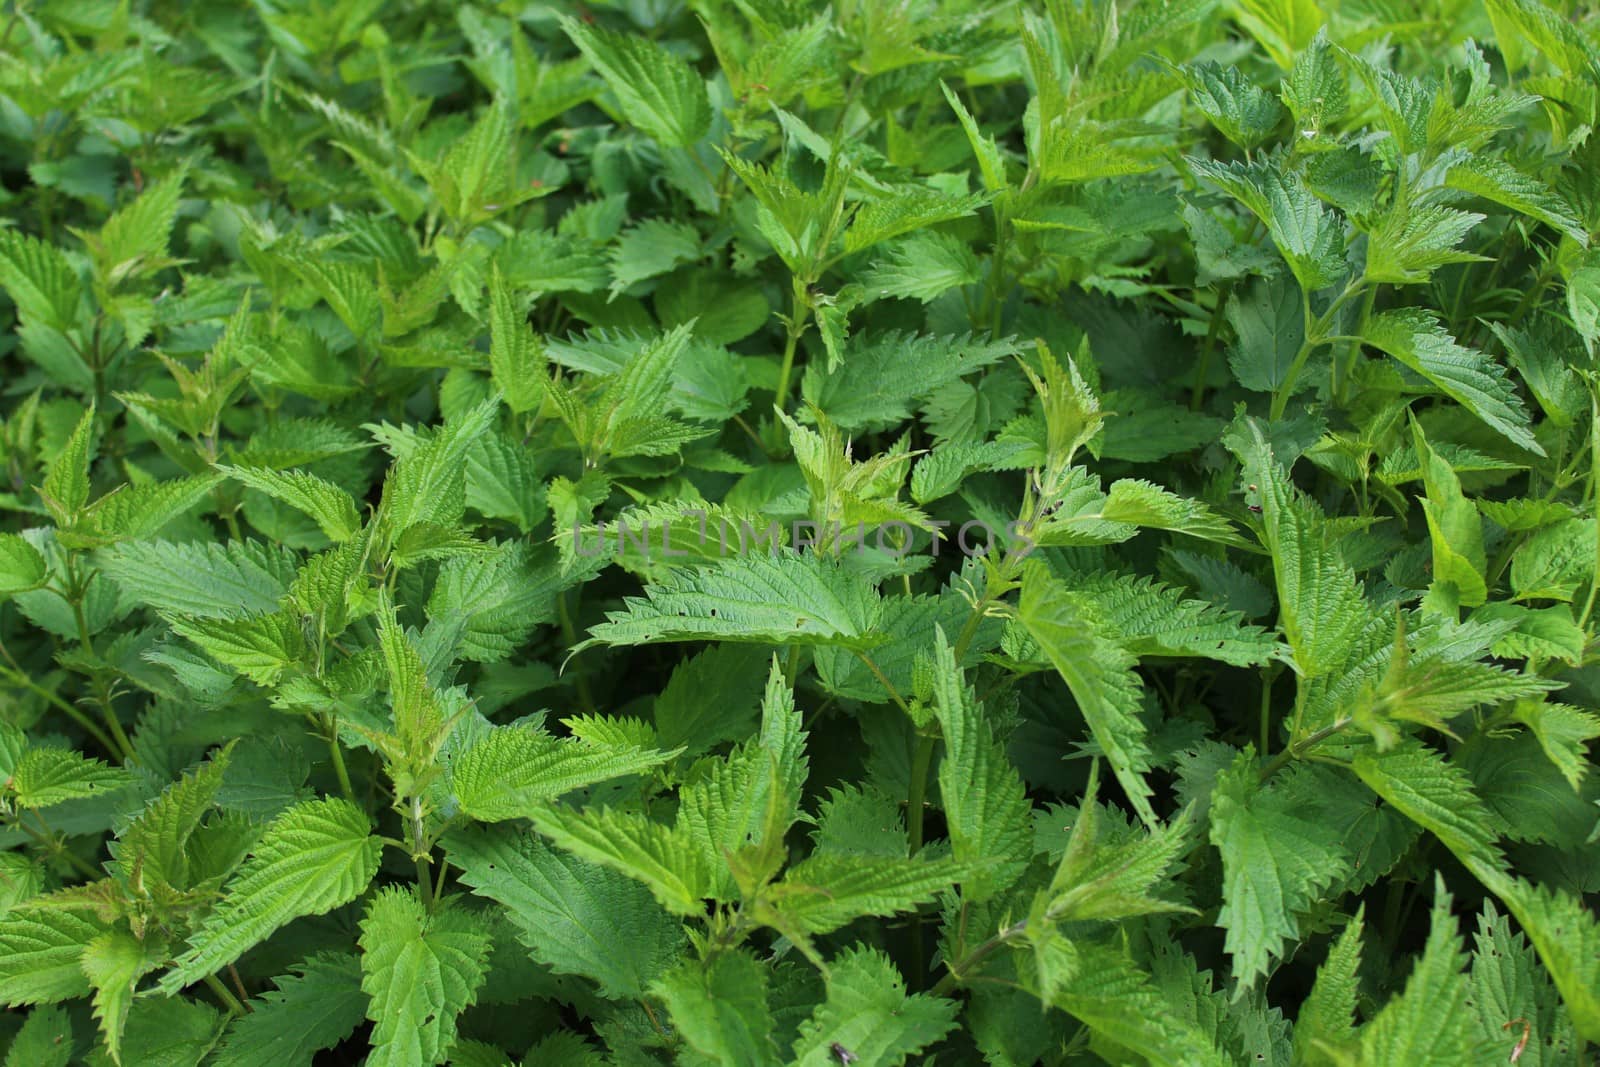 The picture shows many stinging nettles